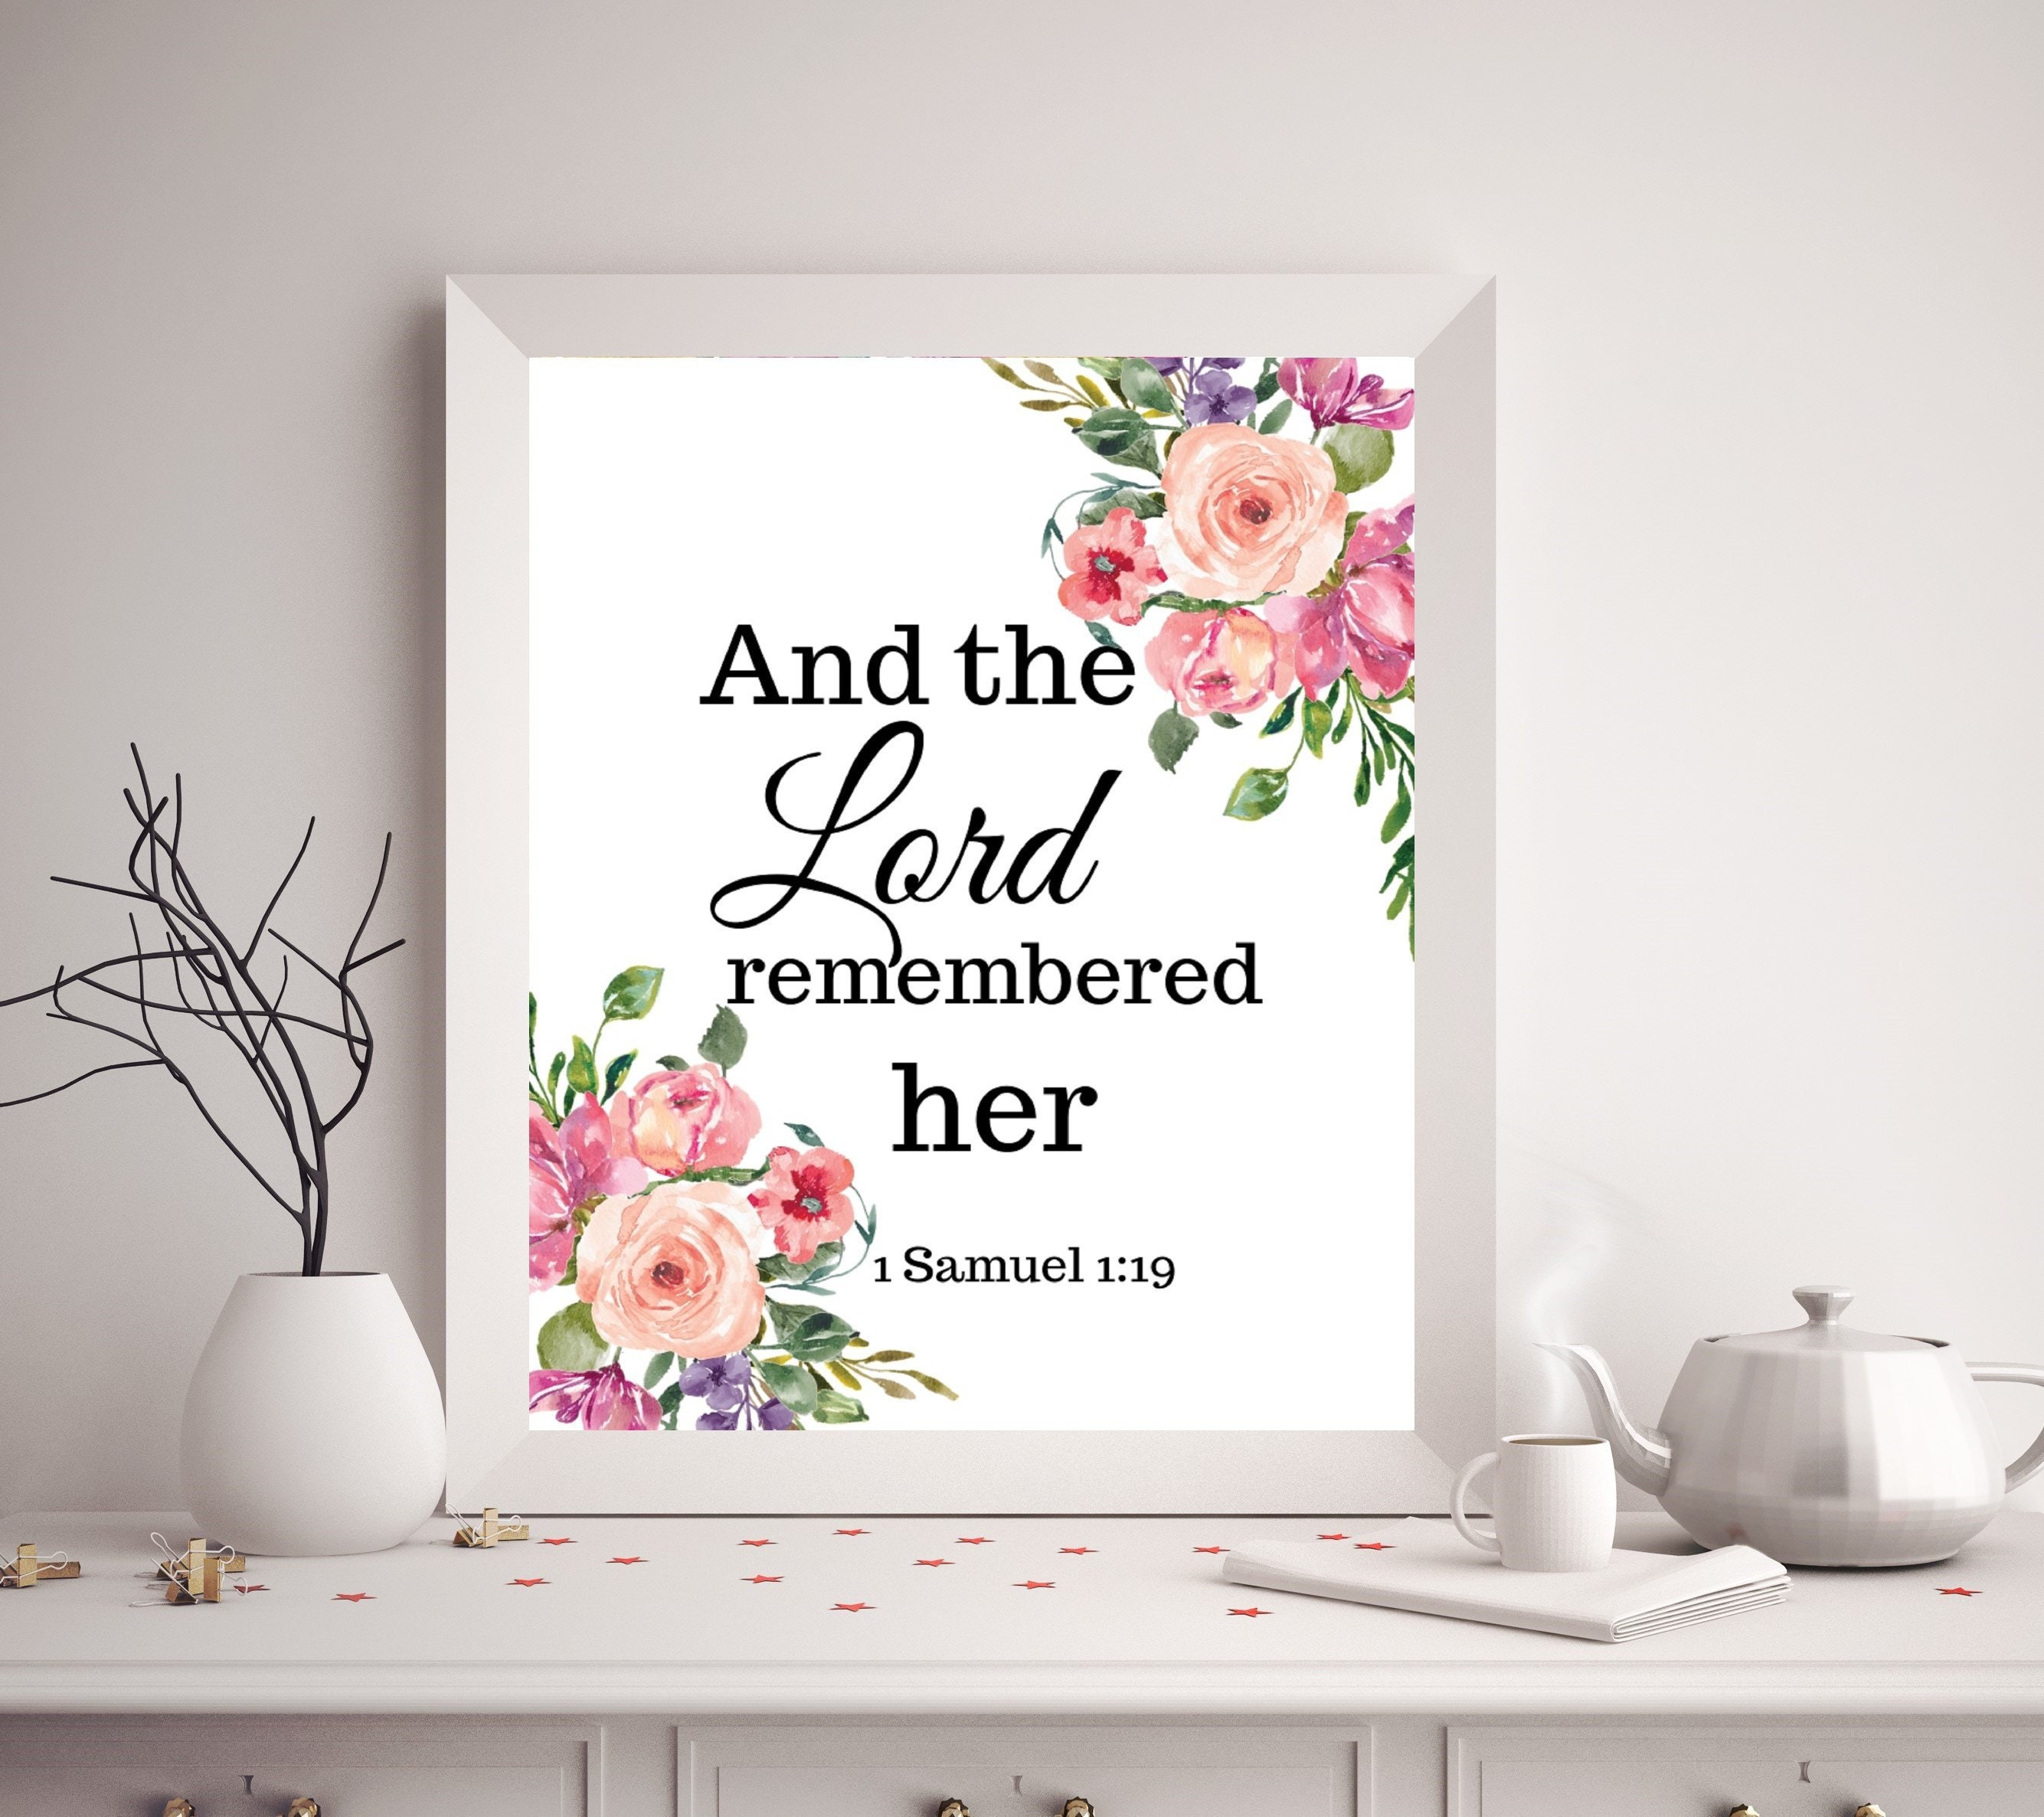 Bible Verse Poster And The Lord Remembered Her 1 Samuel 1:19 | Etsy